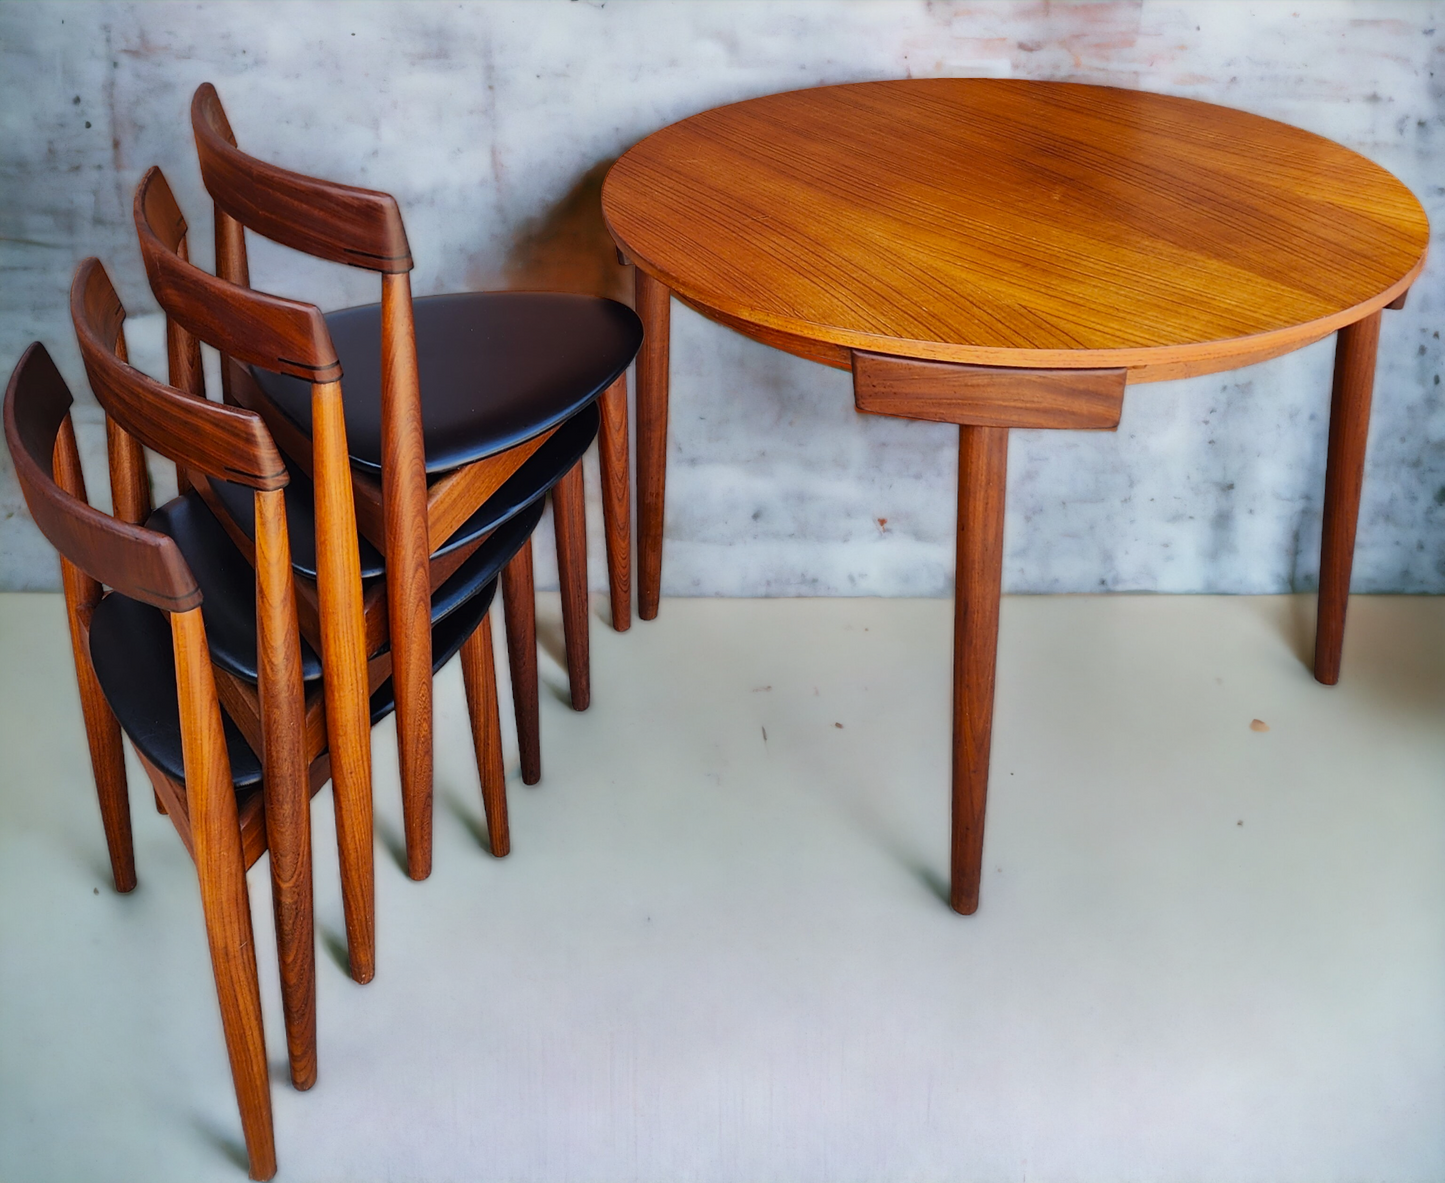 On Hold***REFINISHED Danish MCM ROUNDETTE Teak Dining Table & 4 Chairs by Hans Olsen